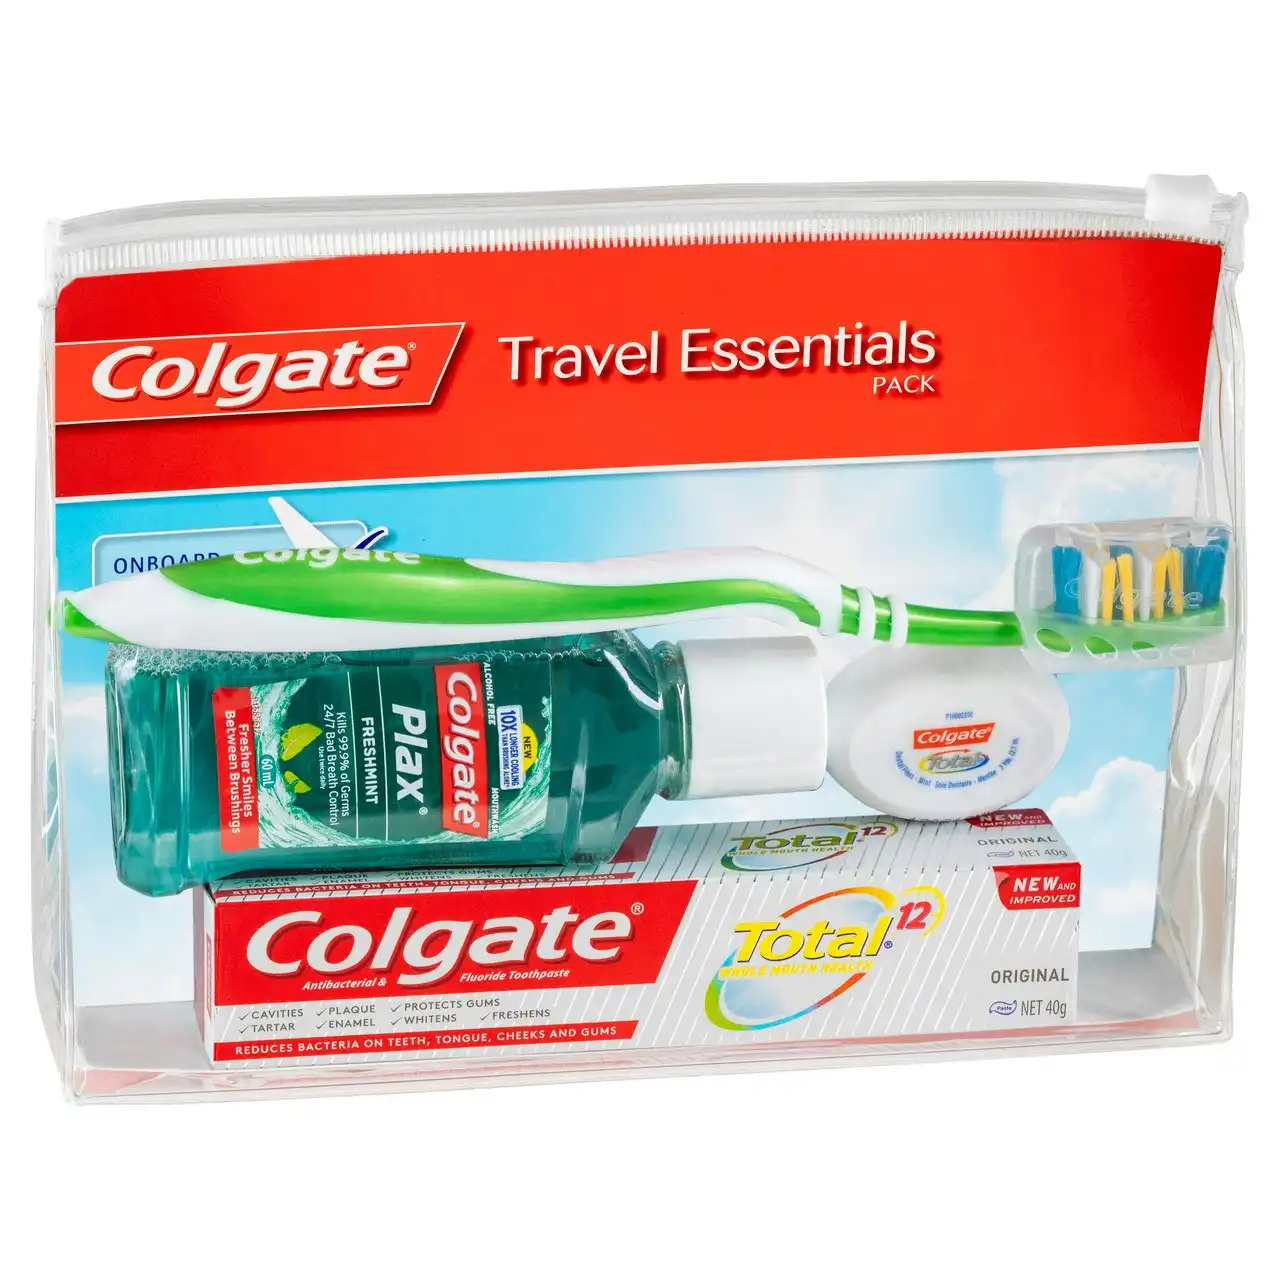 Colgate Travel Essentials Kit, 1 Pack, Toothbrush, Toothpaste, Mouthwash, Floss and Travel Bag Pack